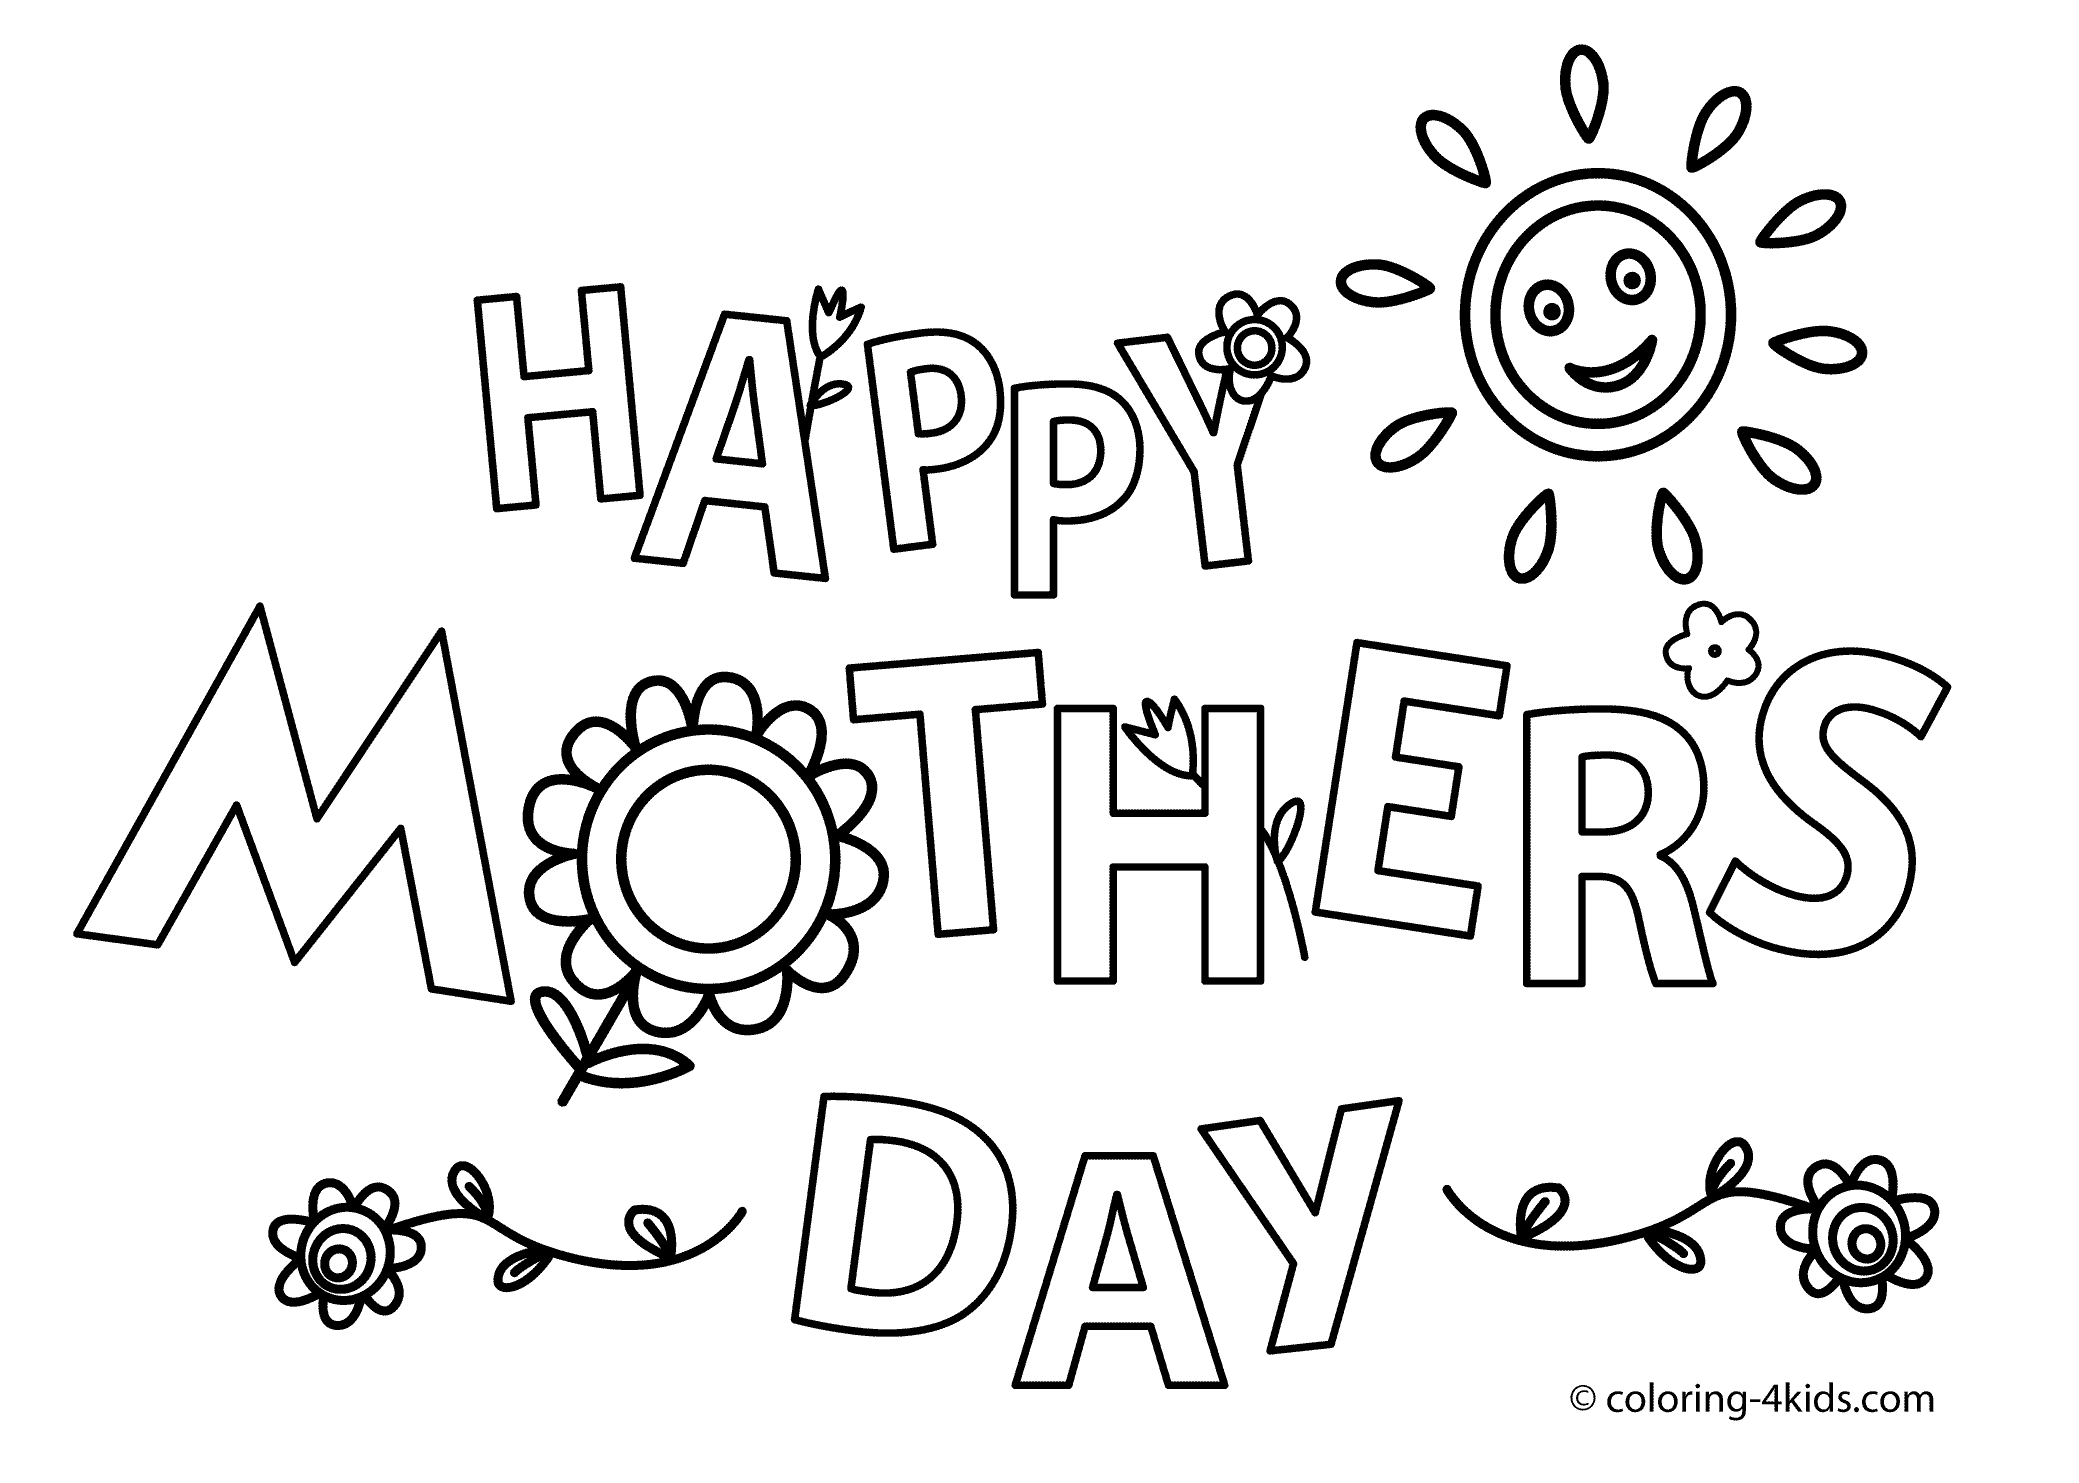 Happy mothers day coloring pages download and print for free